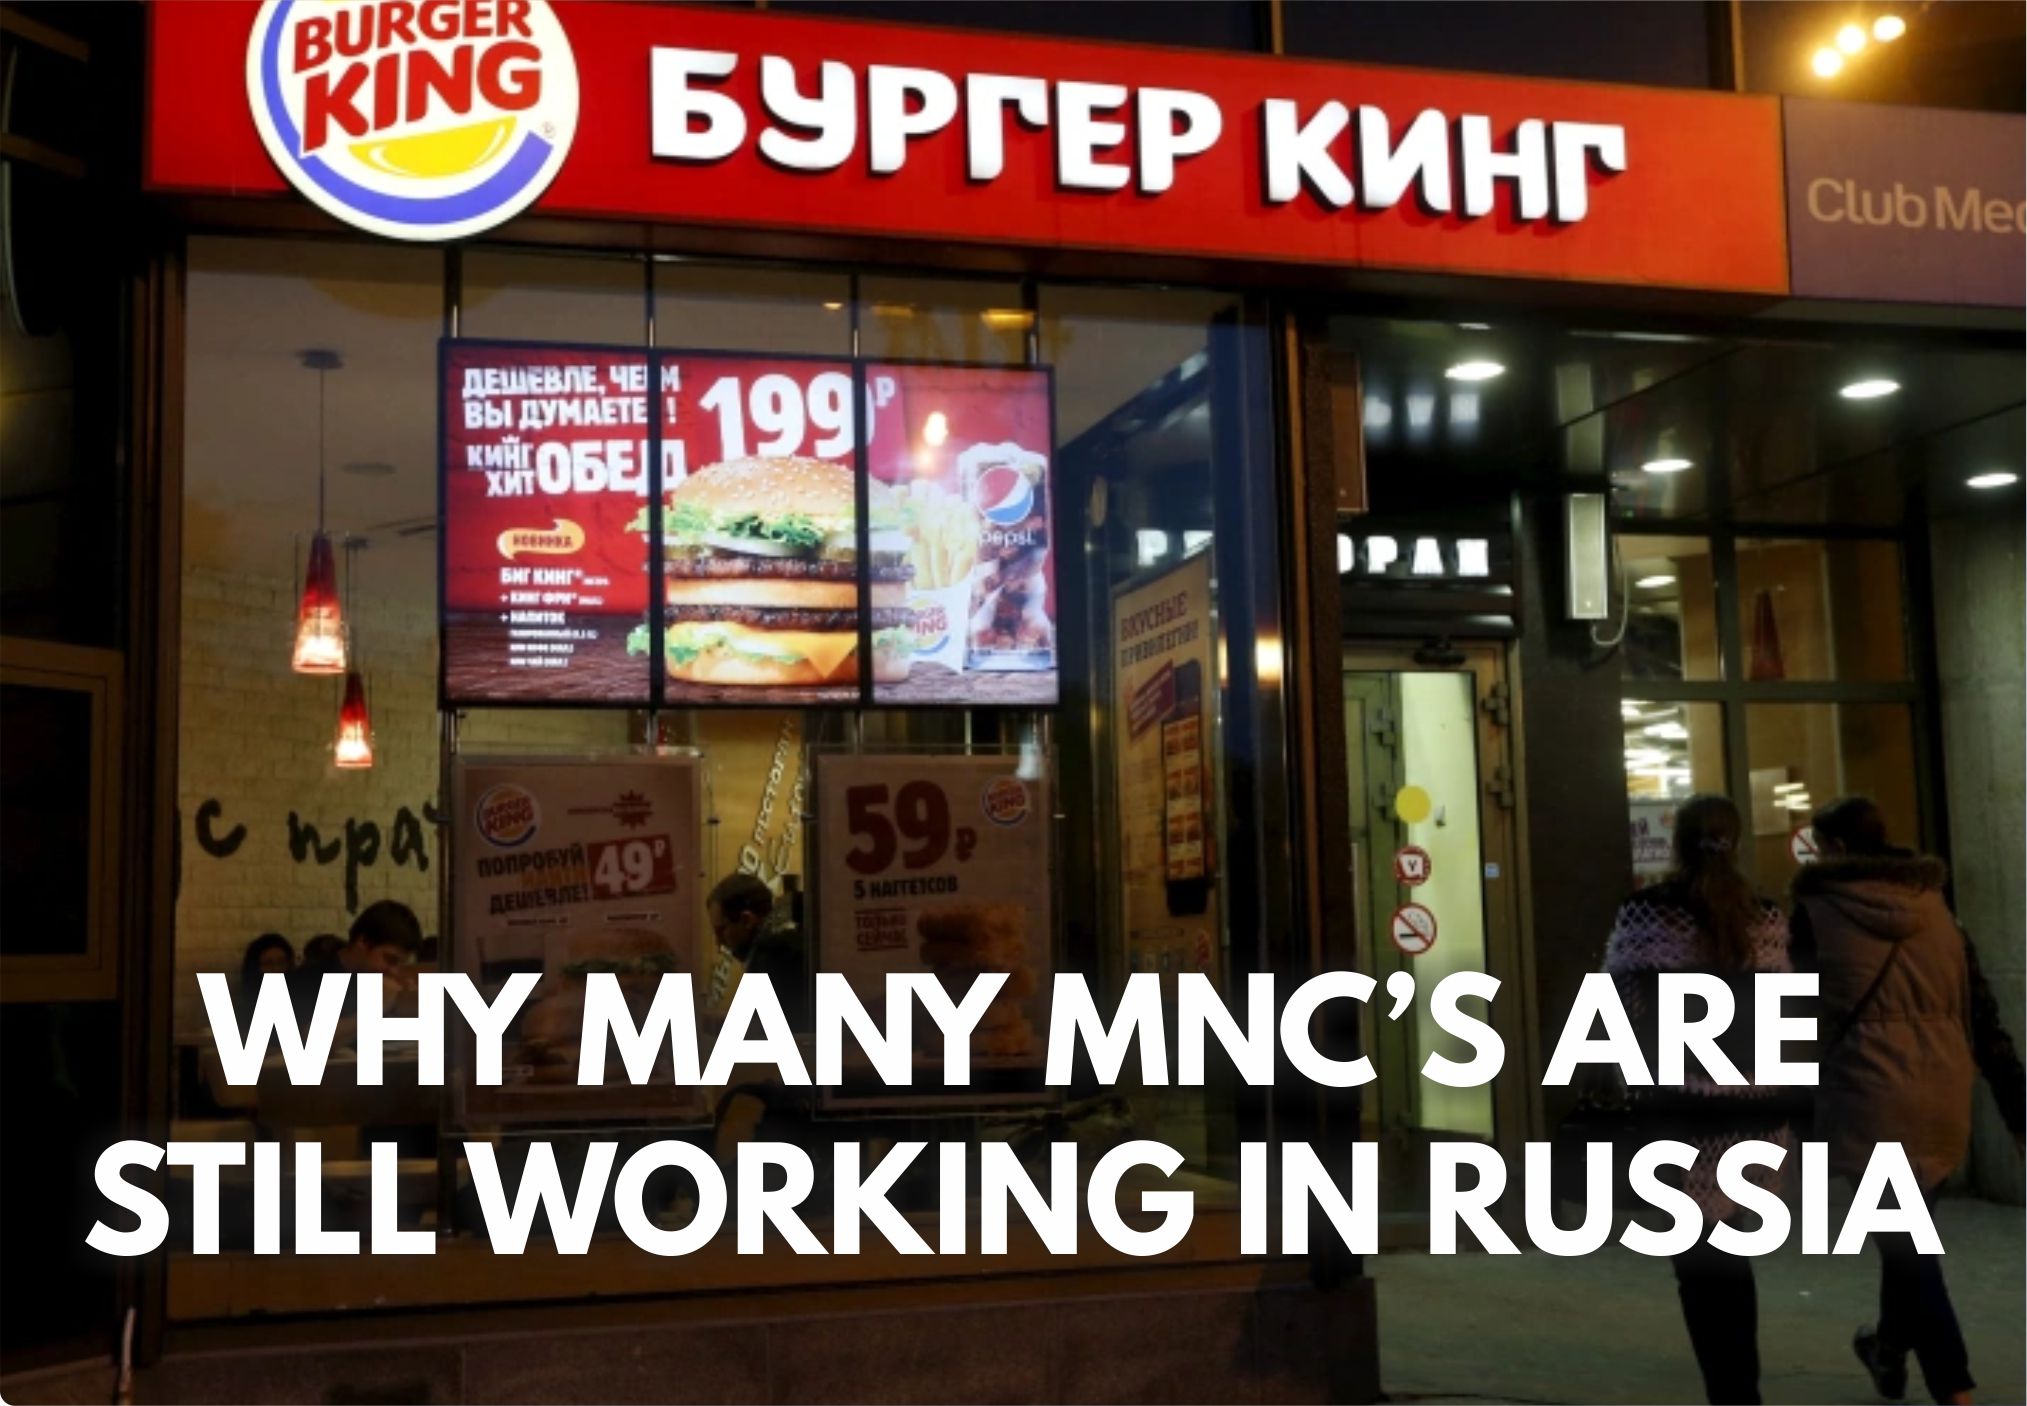 Why around a thousand MNC are not able to leave Russia?